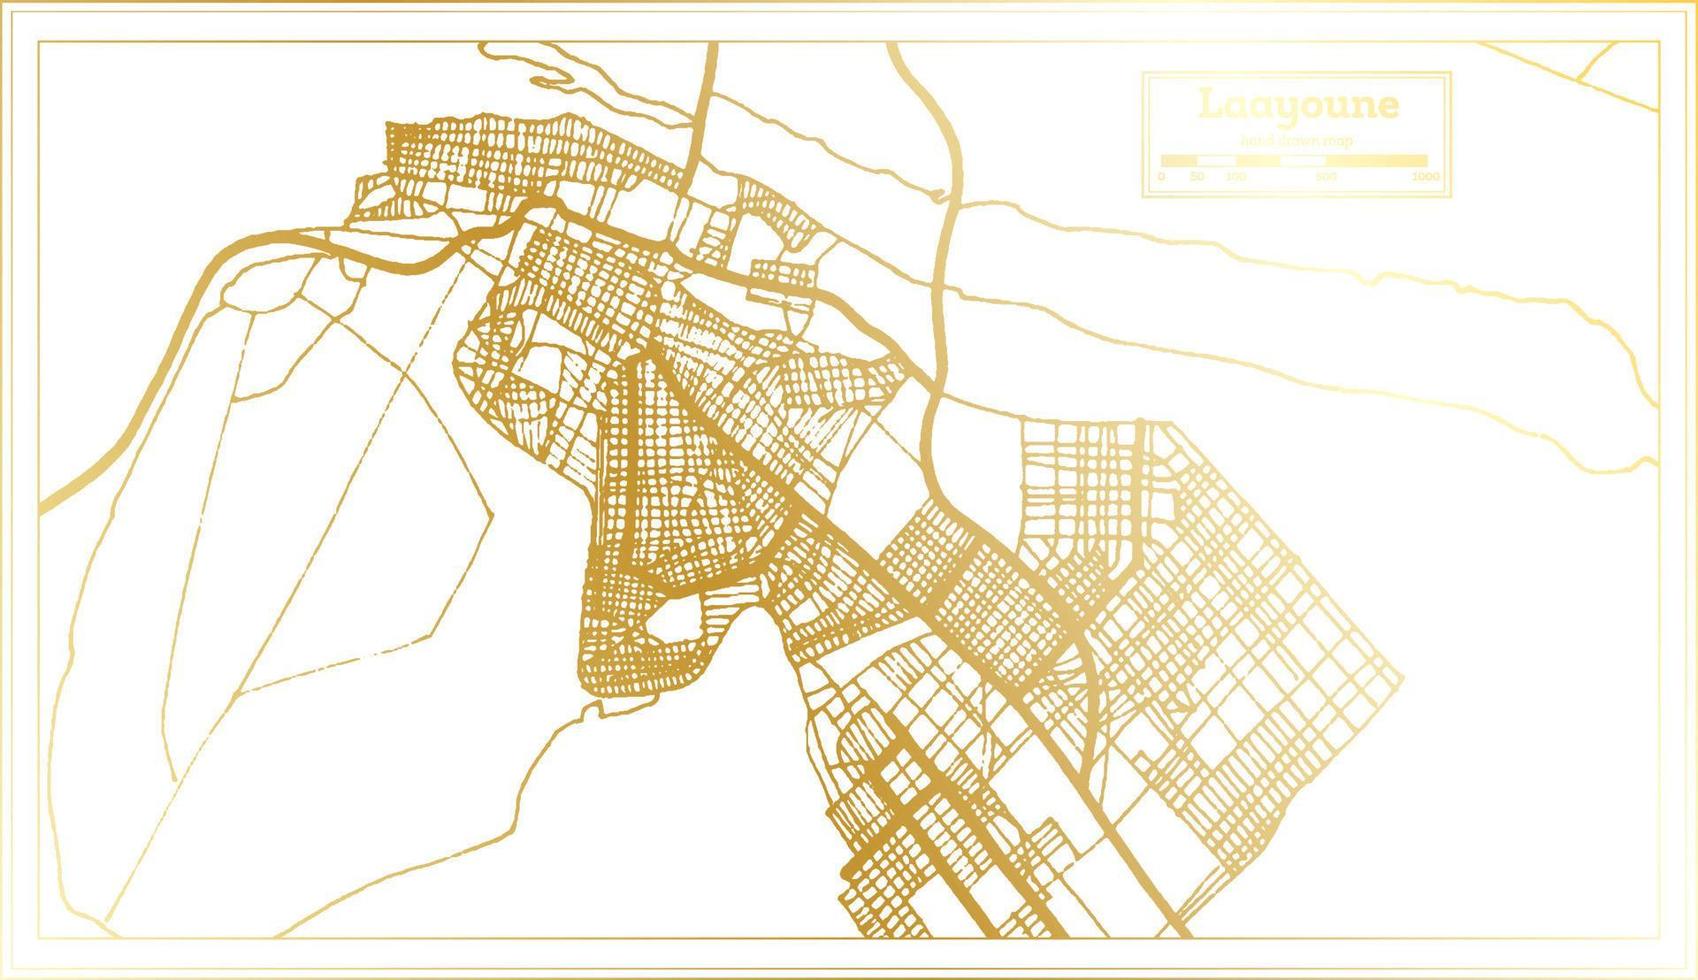 Laayoune Sahara City Map in Retro Style in Golden Color. Outline Map. vector